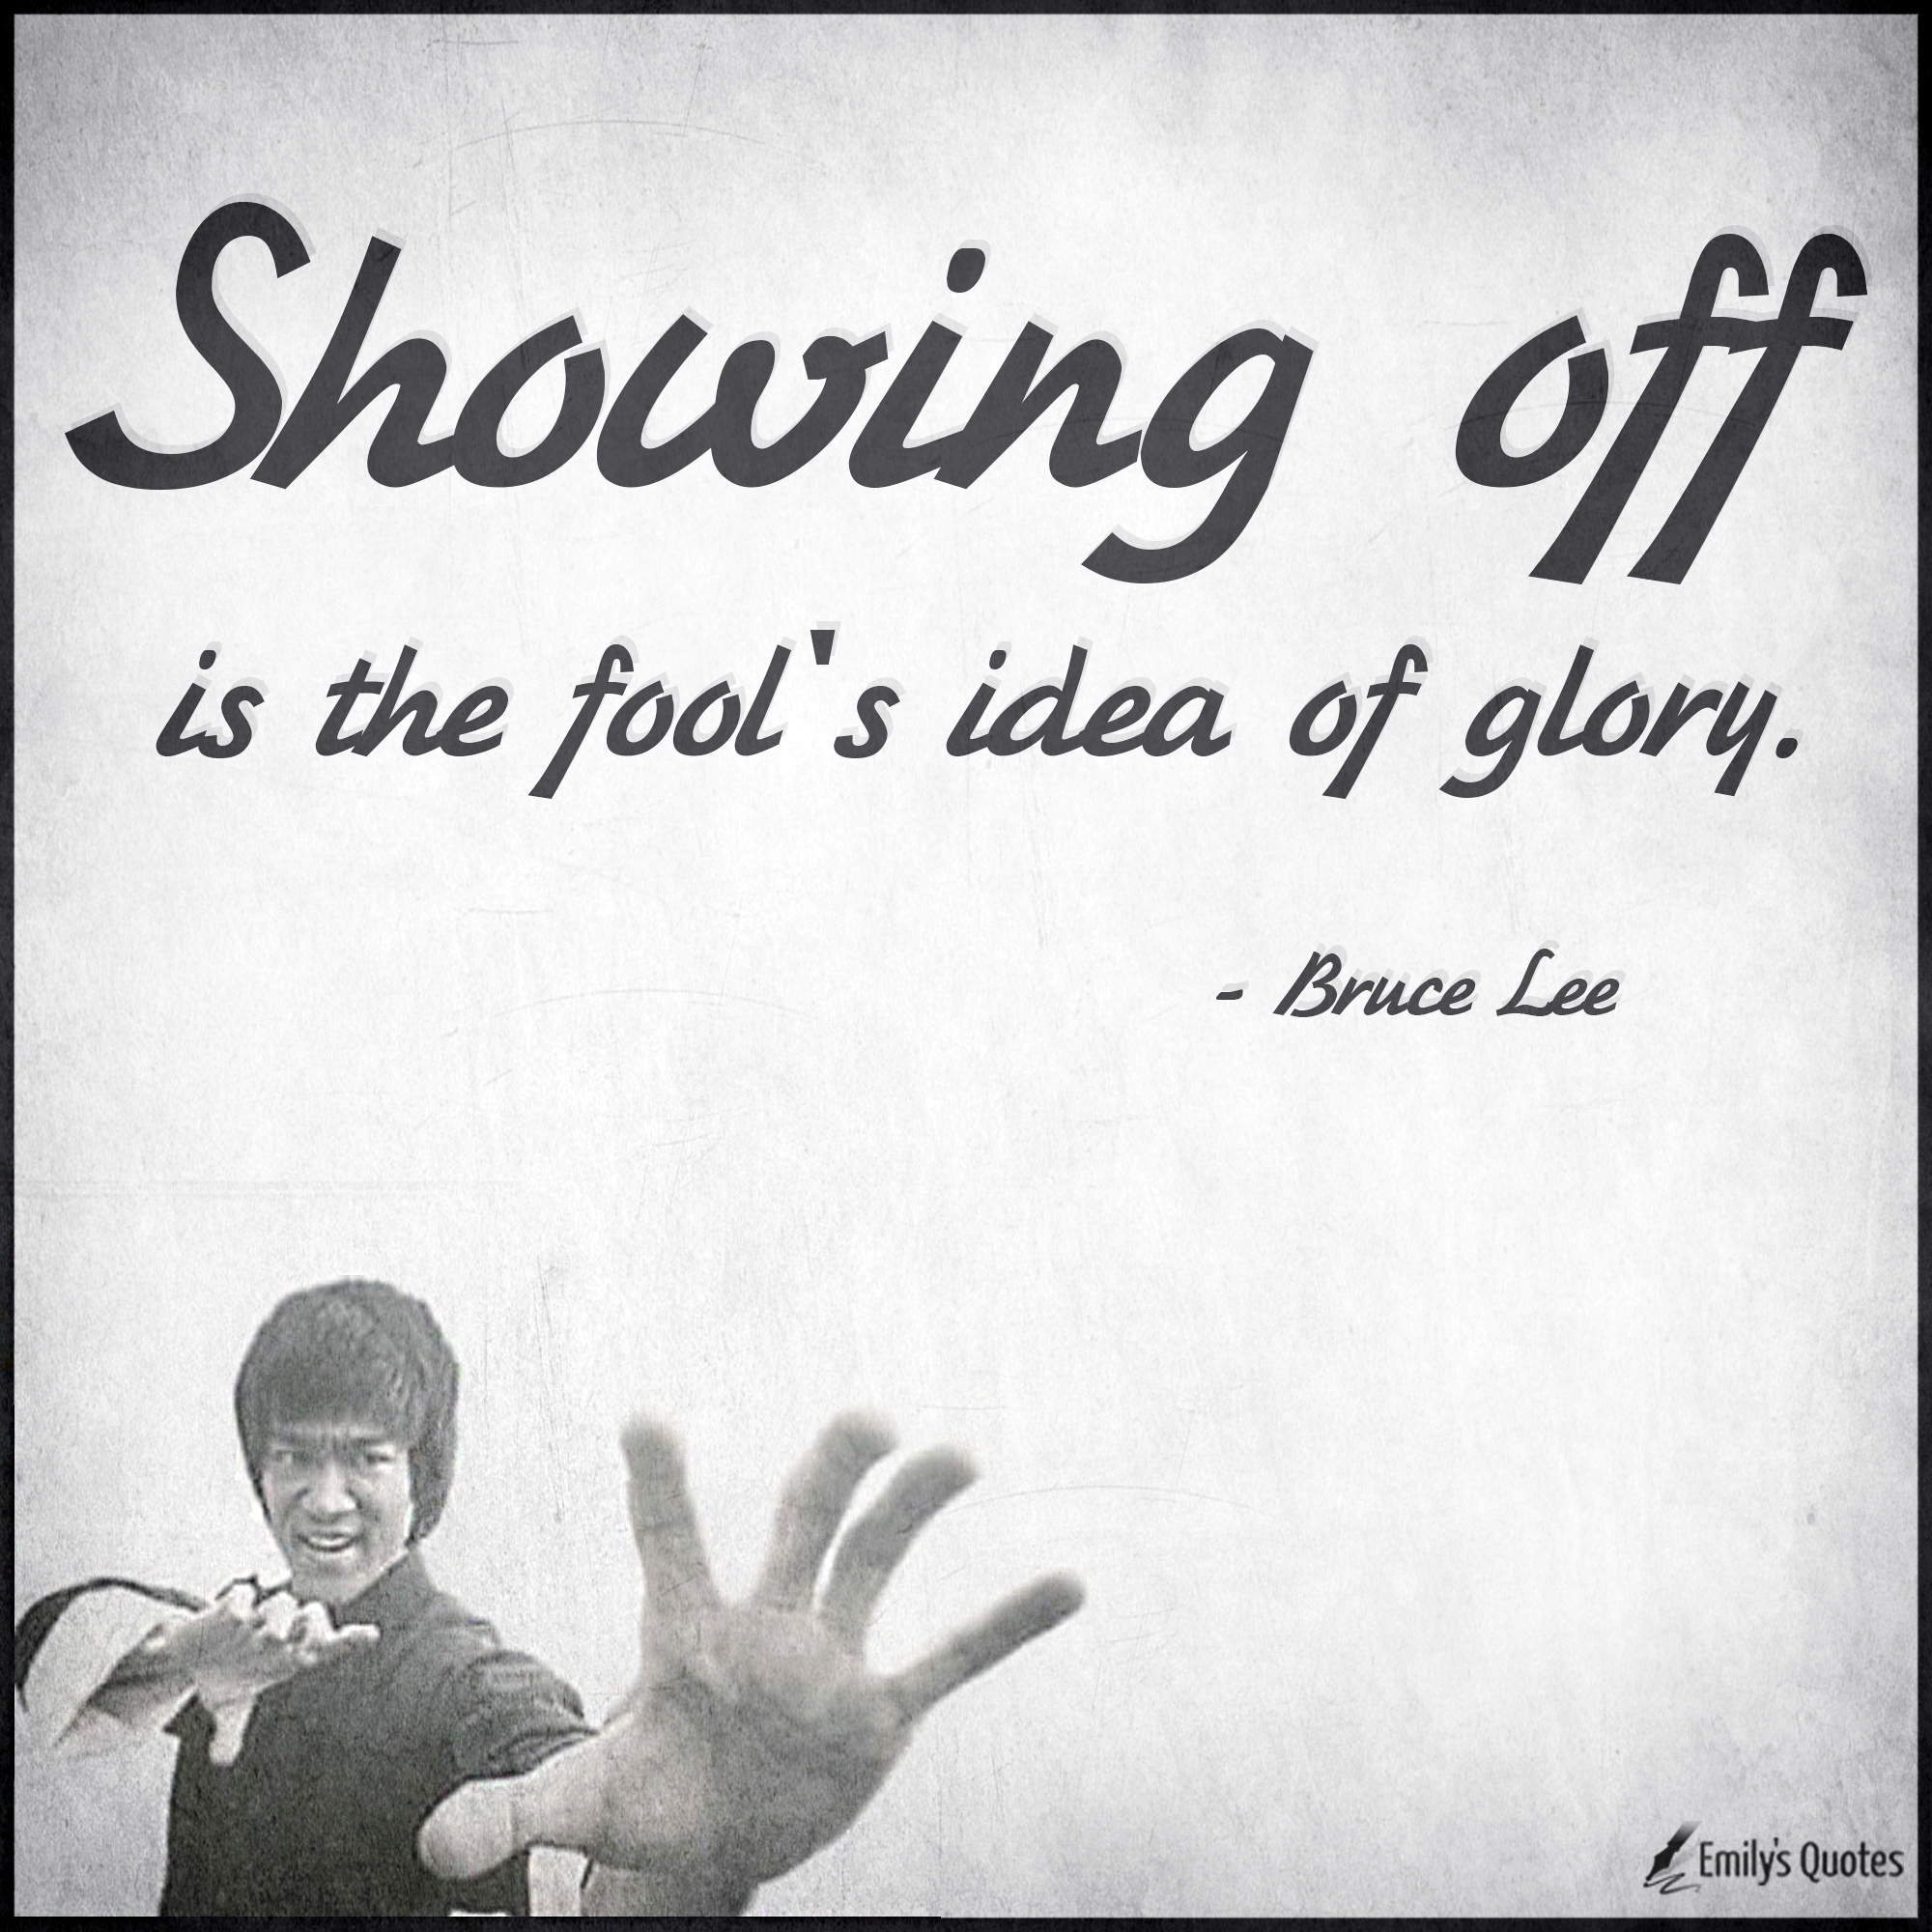 Showing off is the fool’s idea of glory